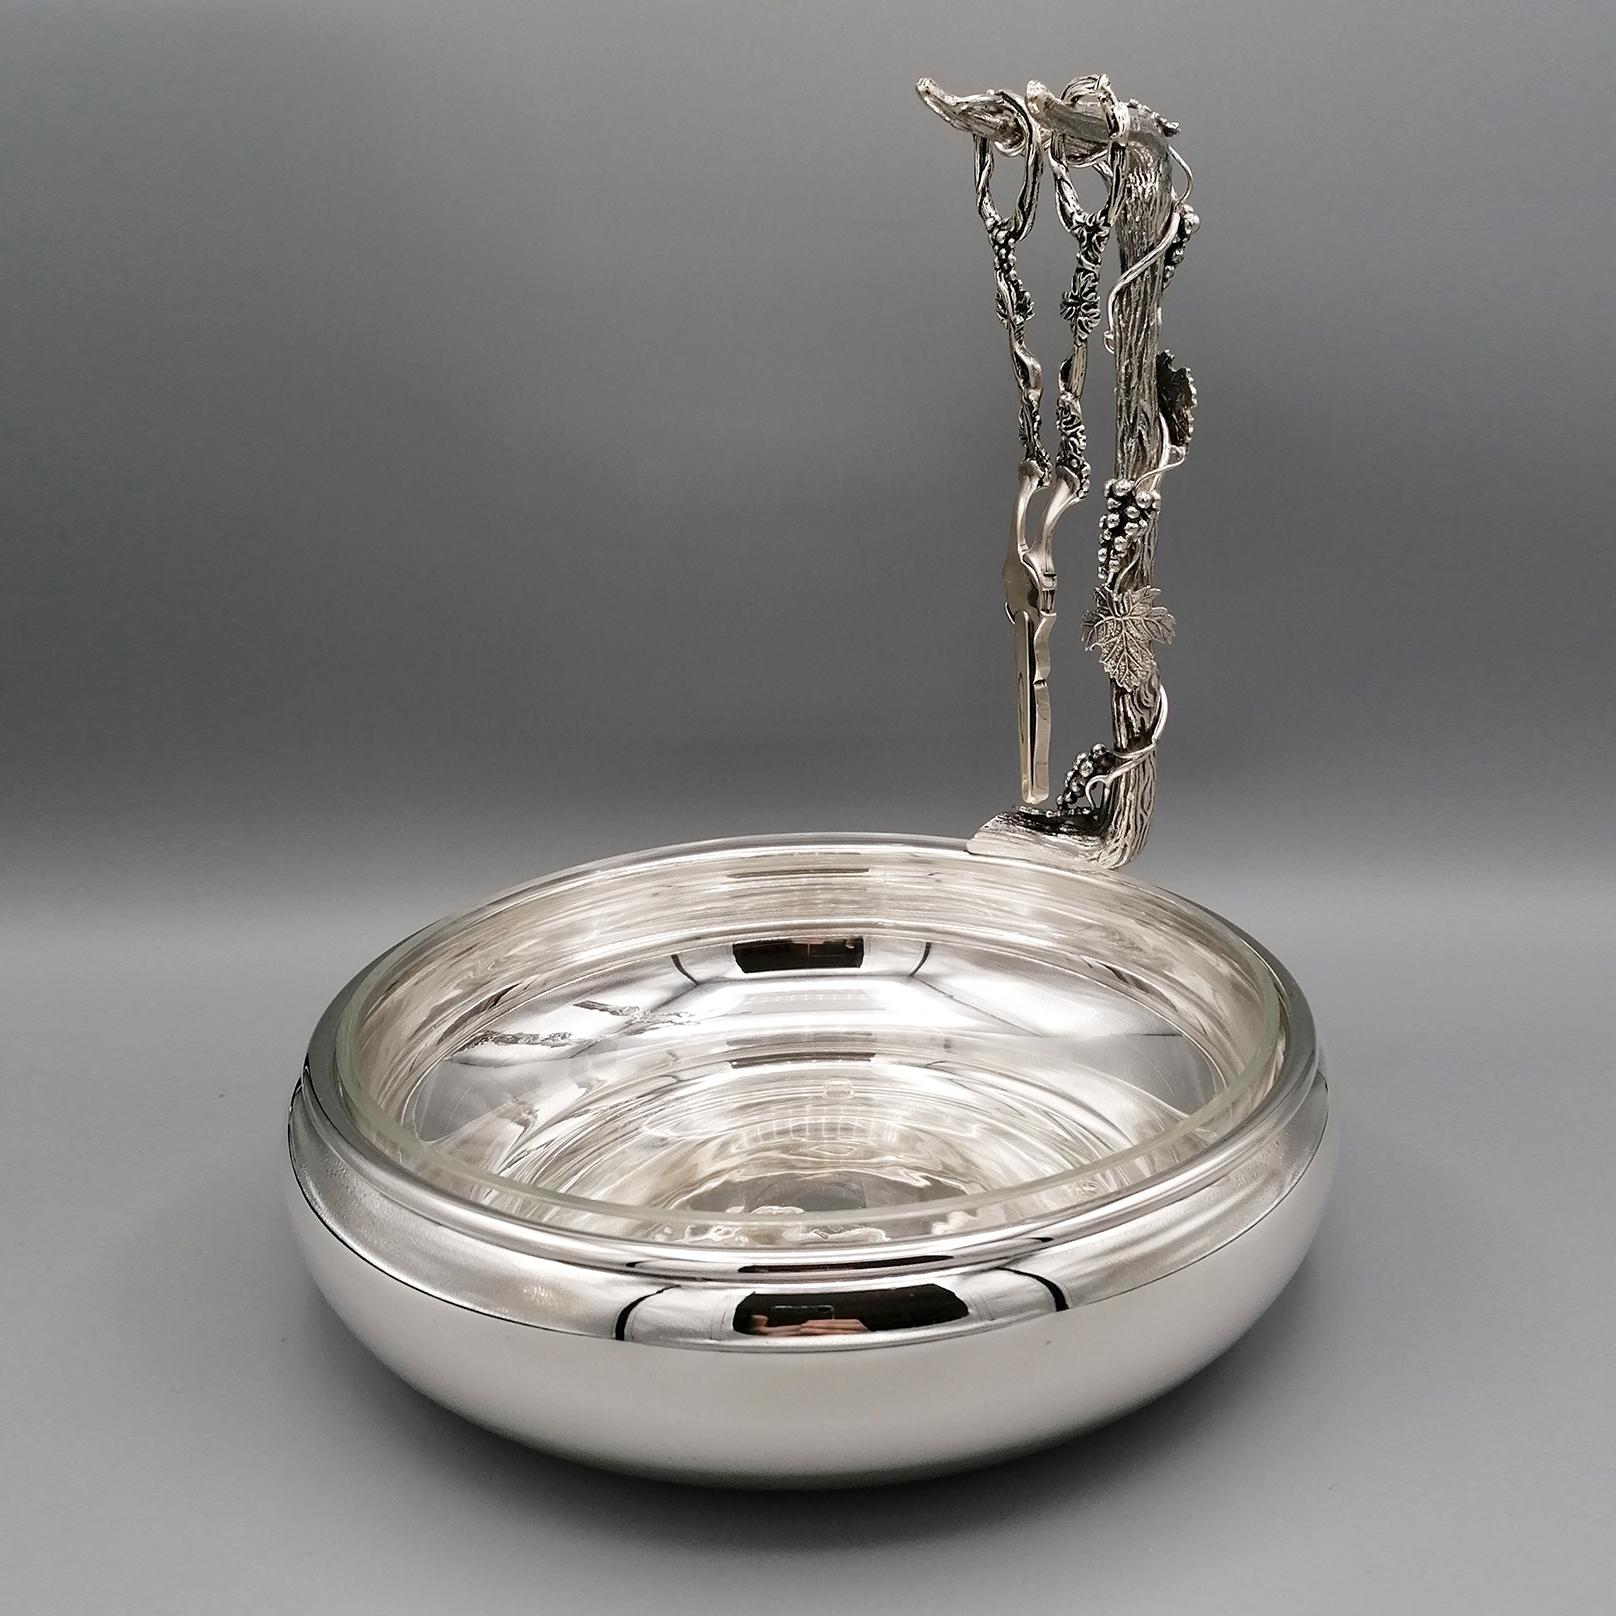 Bowl for grapes with completely smooth with inside a crystal for the bunches of grapes.
A branch with grapes and leaves is welded on the edge, again in solid silver made with the fusion technique and finished with chisel.
The branch in the end